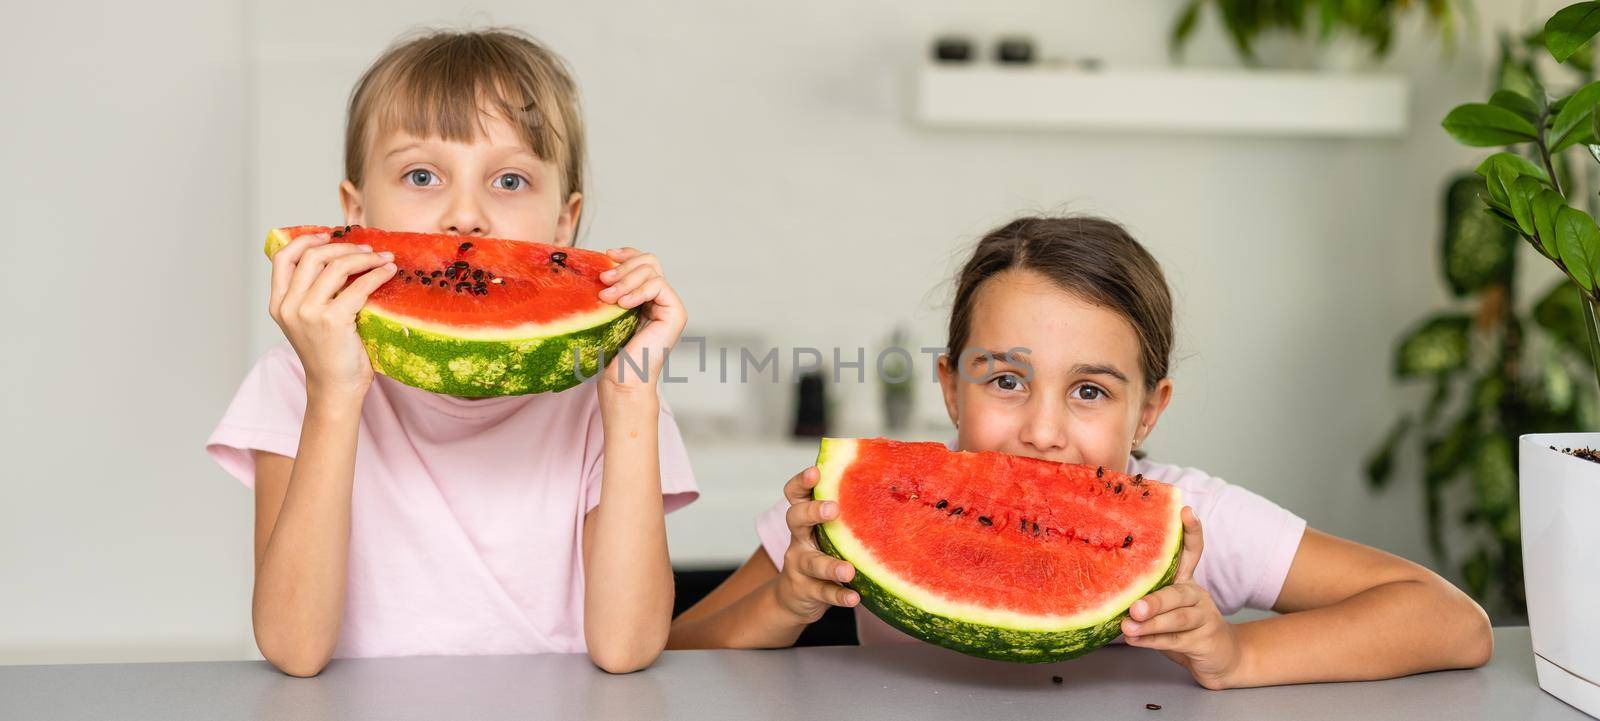 Two girls eating Watermelon isolated at home by Andelov13